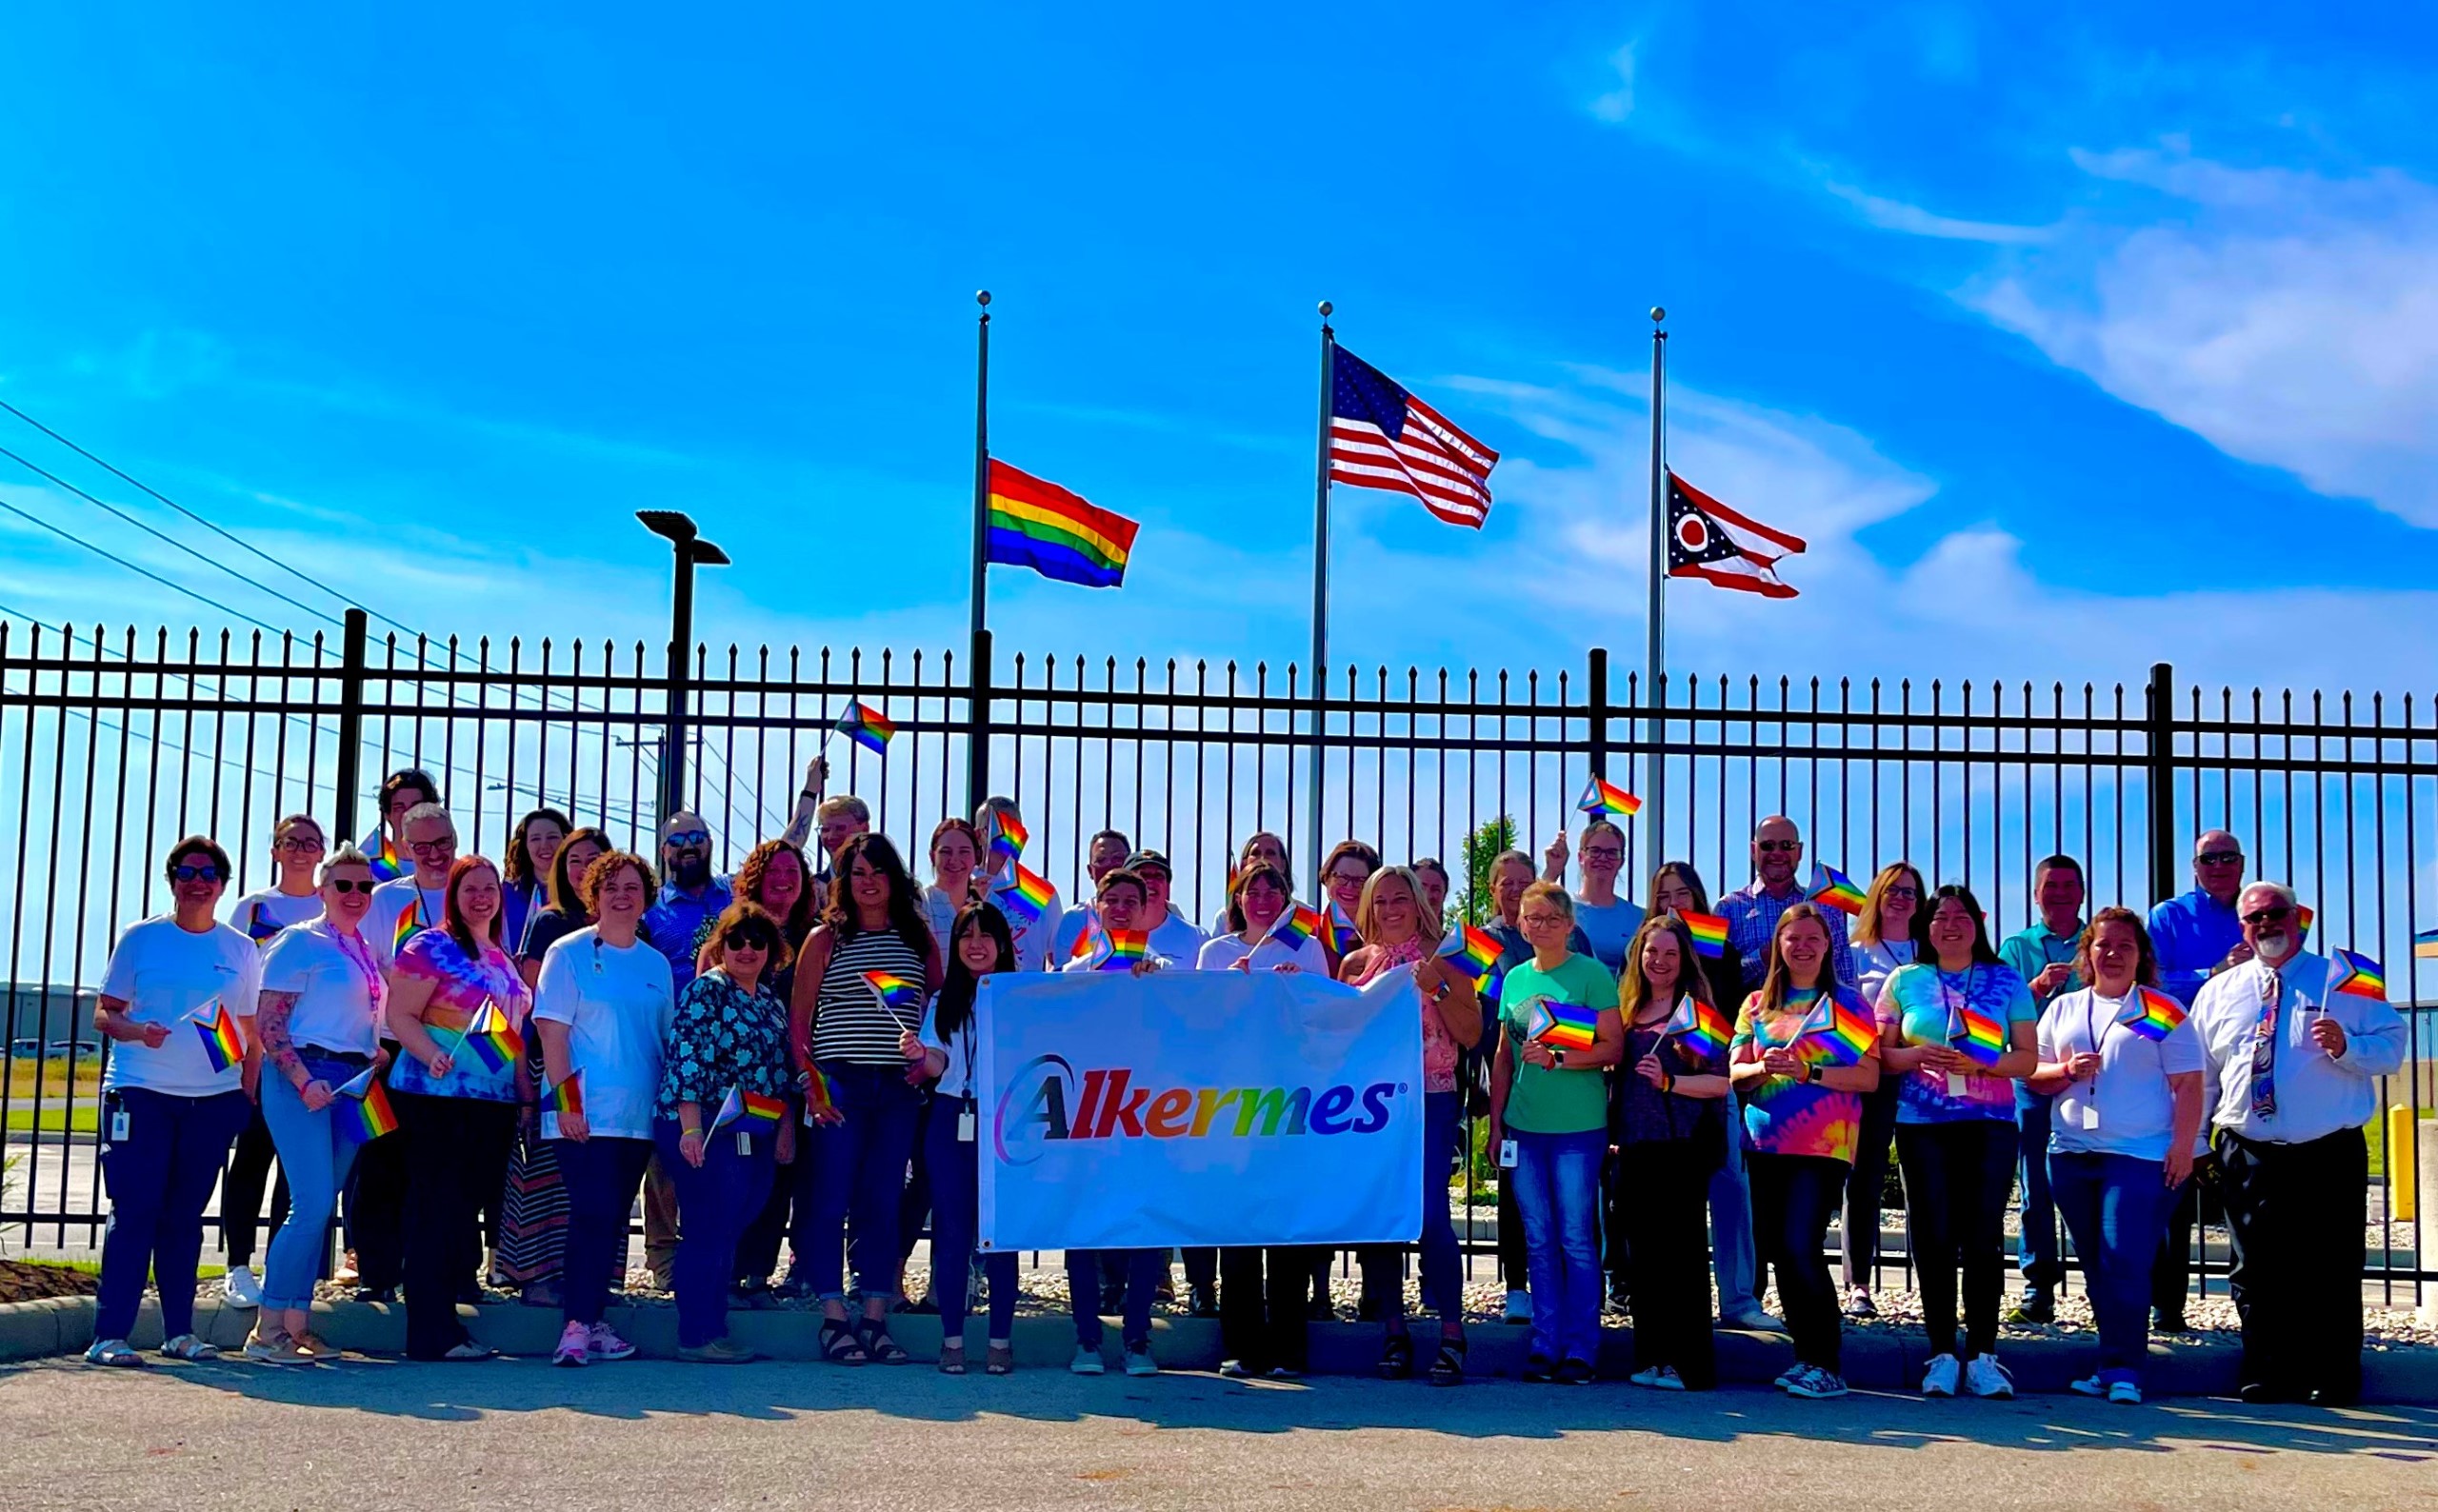 Pride flag flown at Alkermes U.S manufacturing facility in Wilmington, Ohio